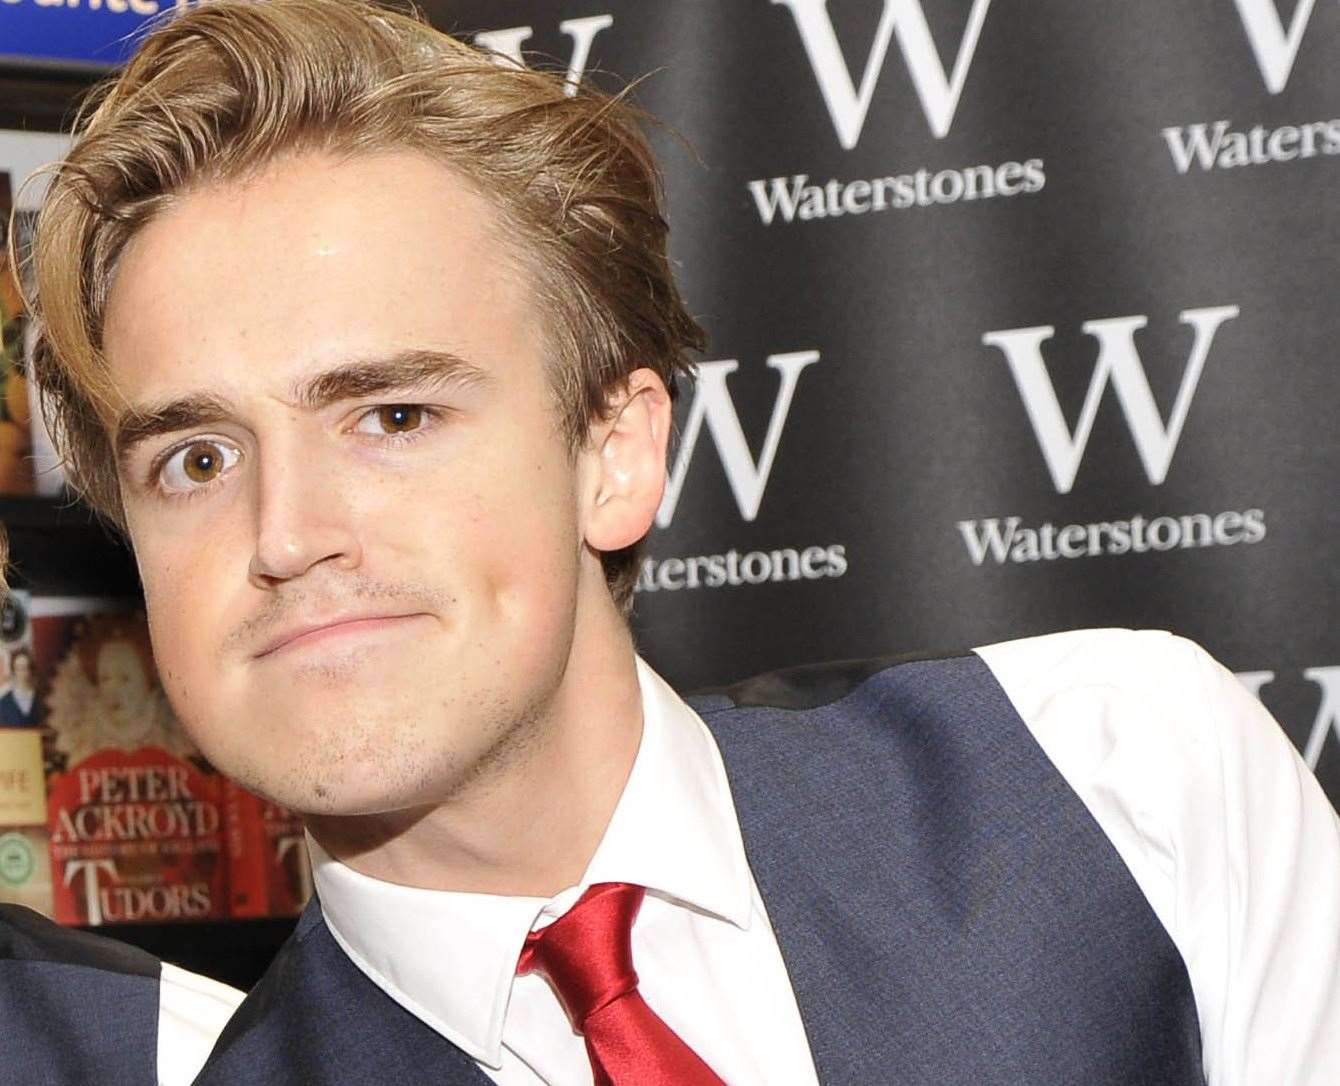 Author and McFly star Tom Fletcher will be signing copies of his latest book at Waterstone's in Bluewater. Picture: Nick Johnson